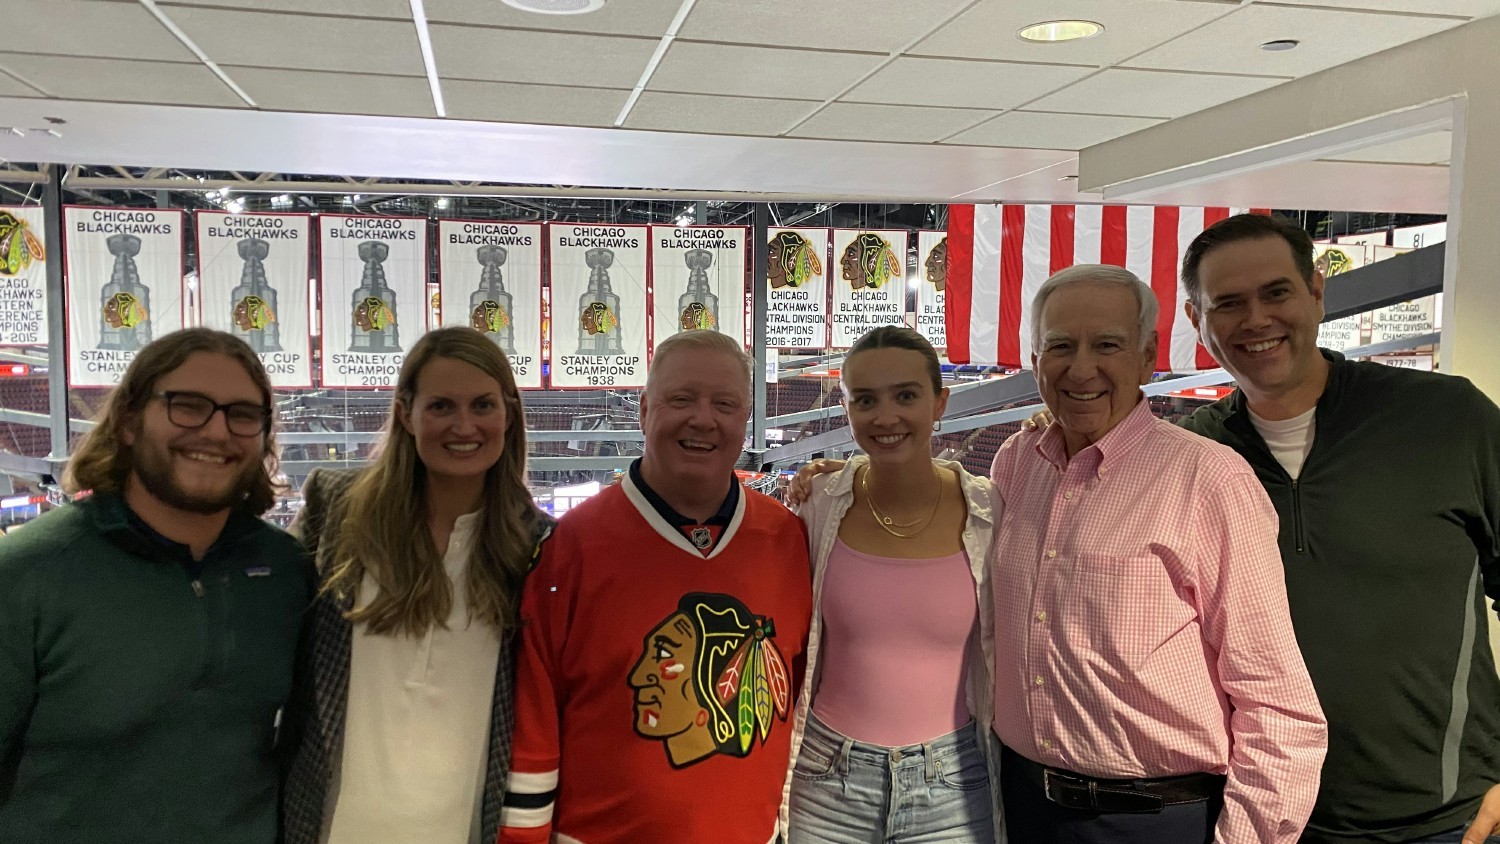 Liberty Advisor Group brings its employees together quarterly for learning and fun. A team at a Chicago Blackhawks game.